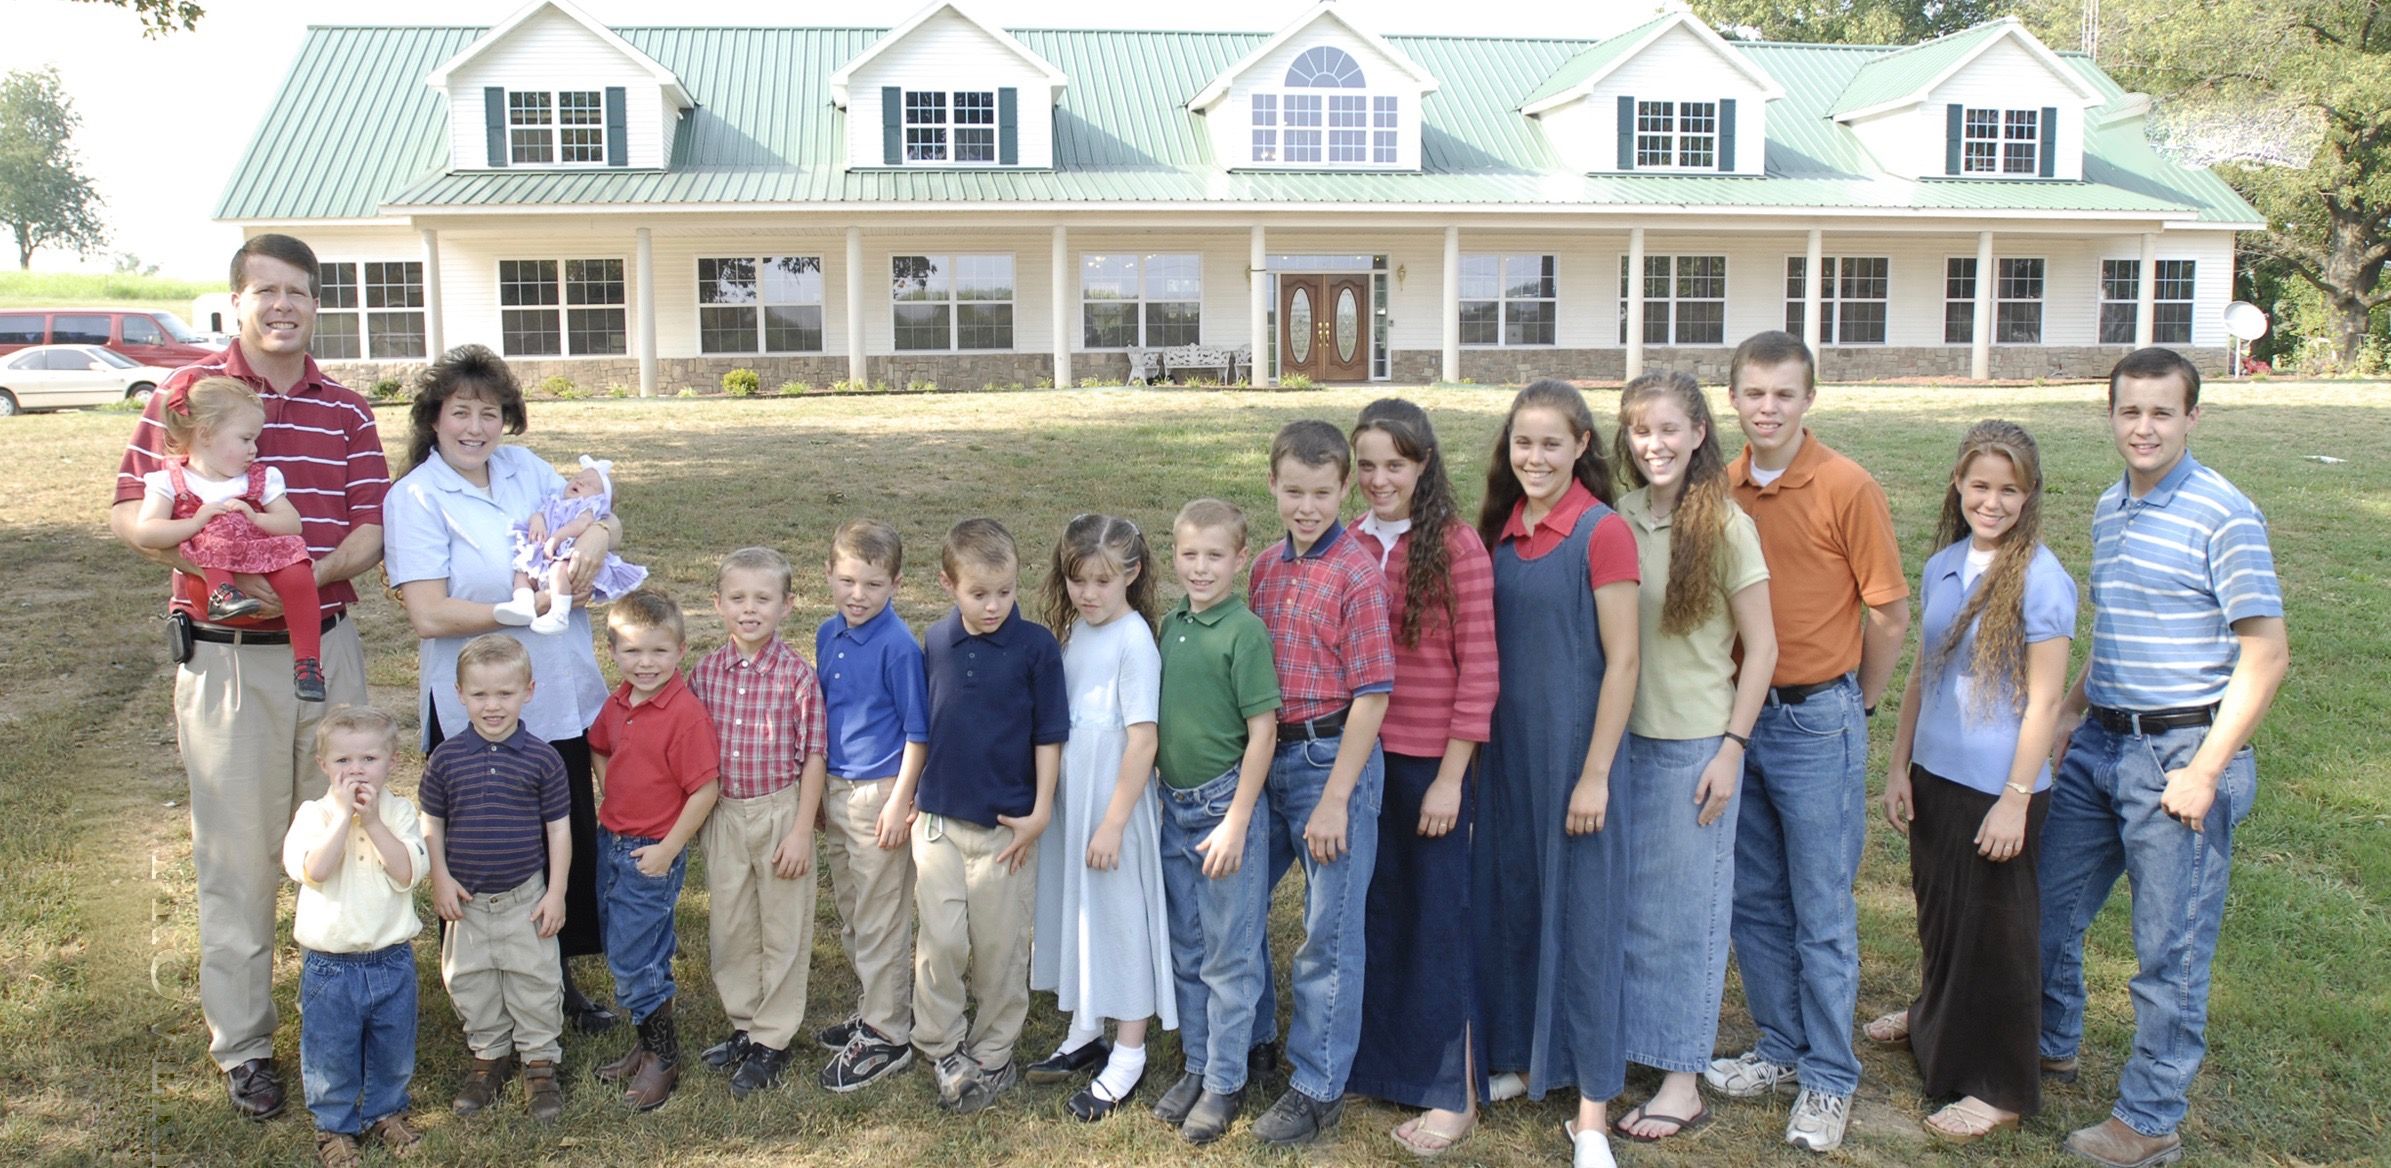 The Duggar Family photographed in 2007